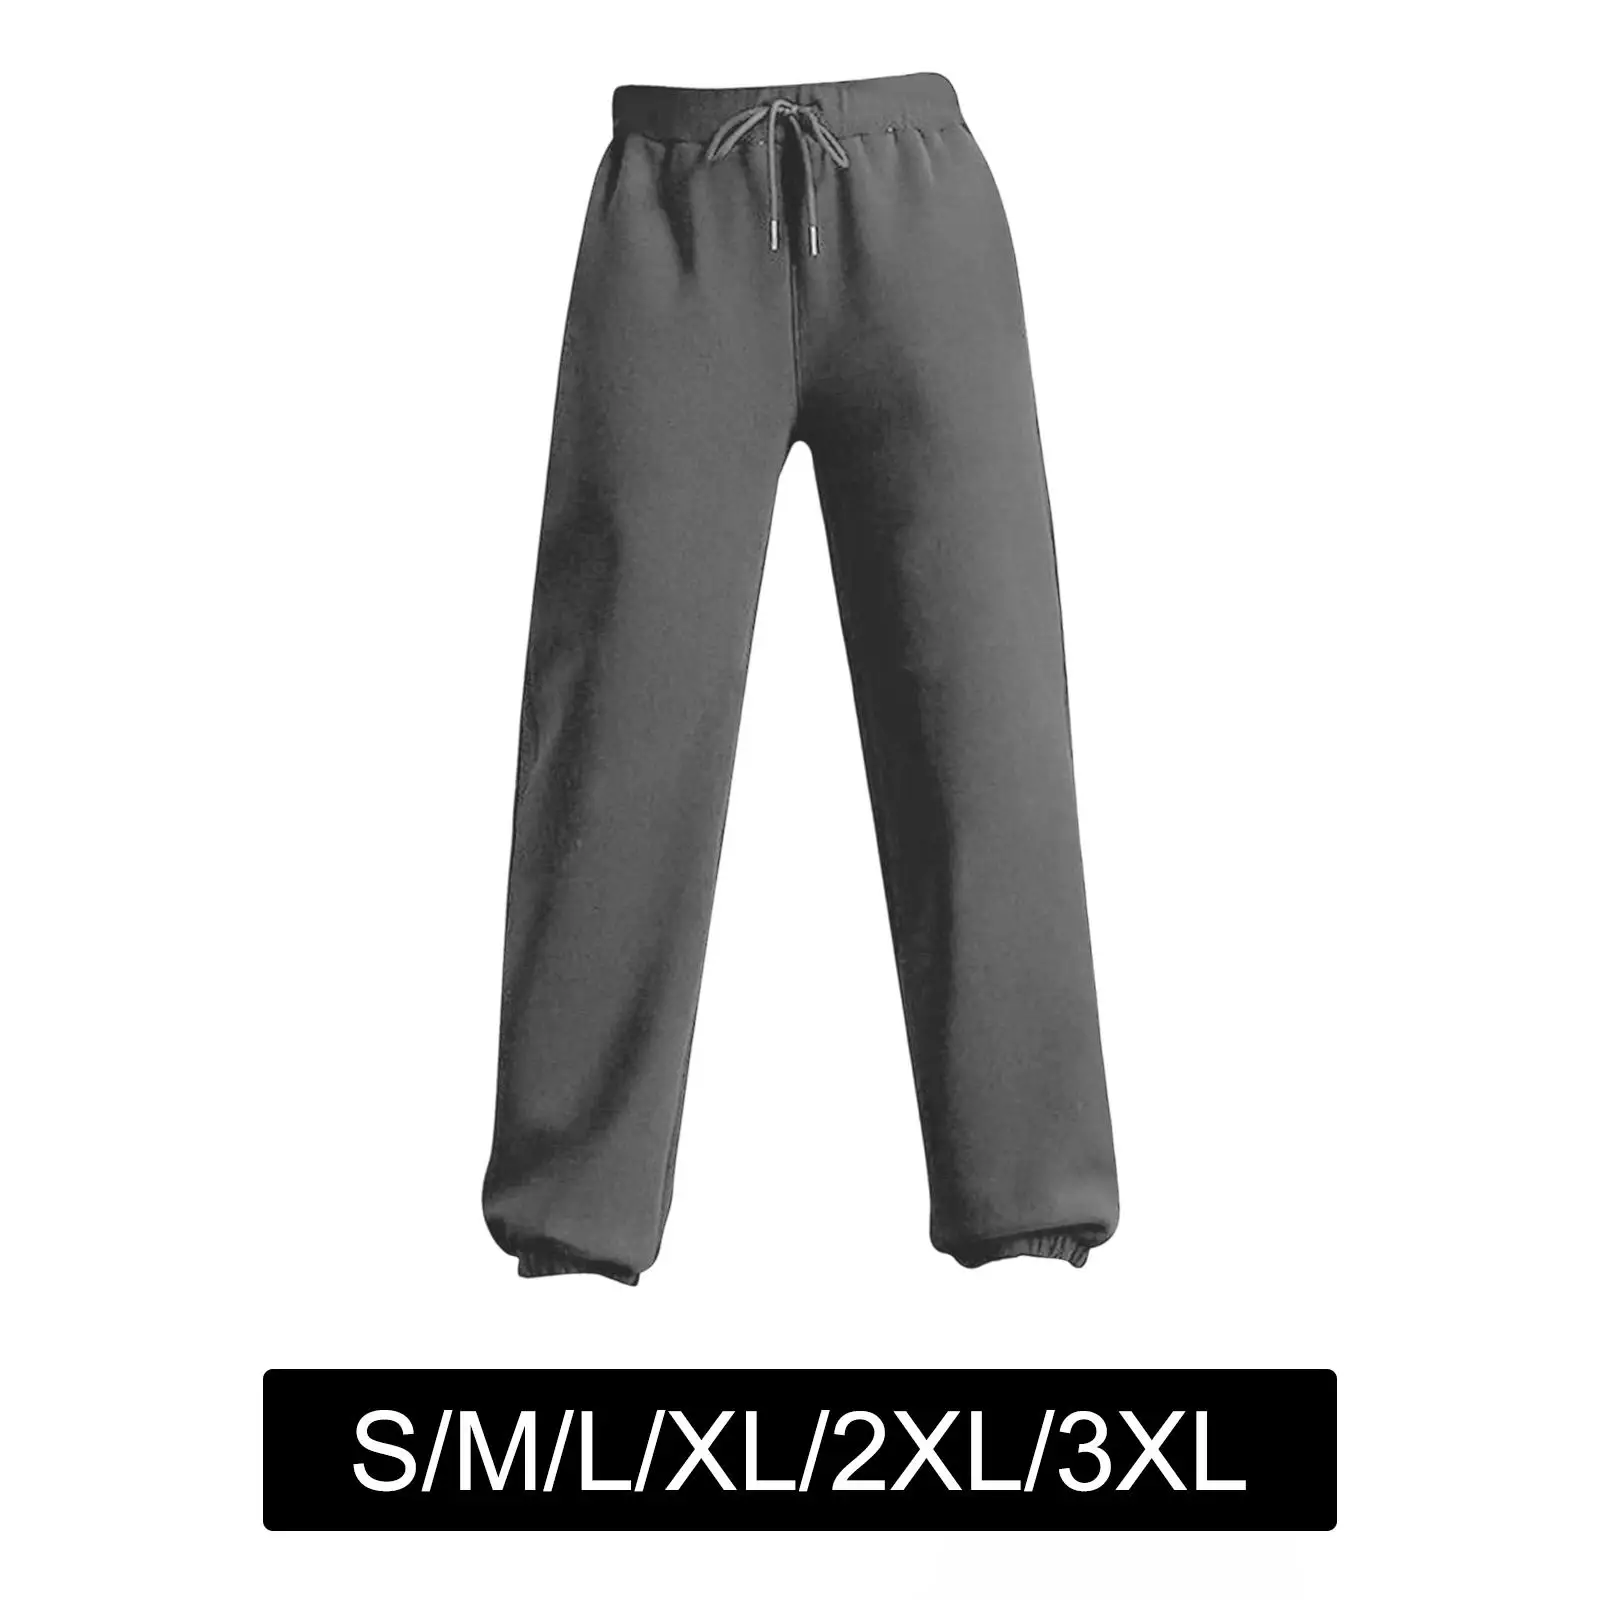 Plush Lined Sweatpants with Pockets Jogger Pants Harem Trousers for Winter Ladies